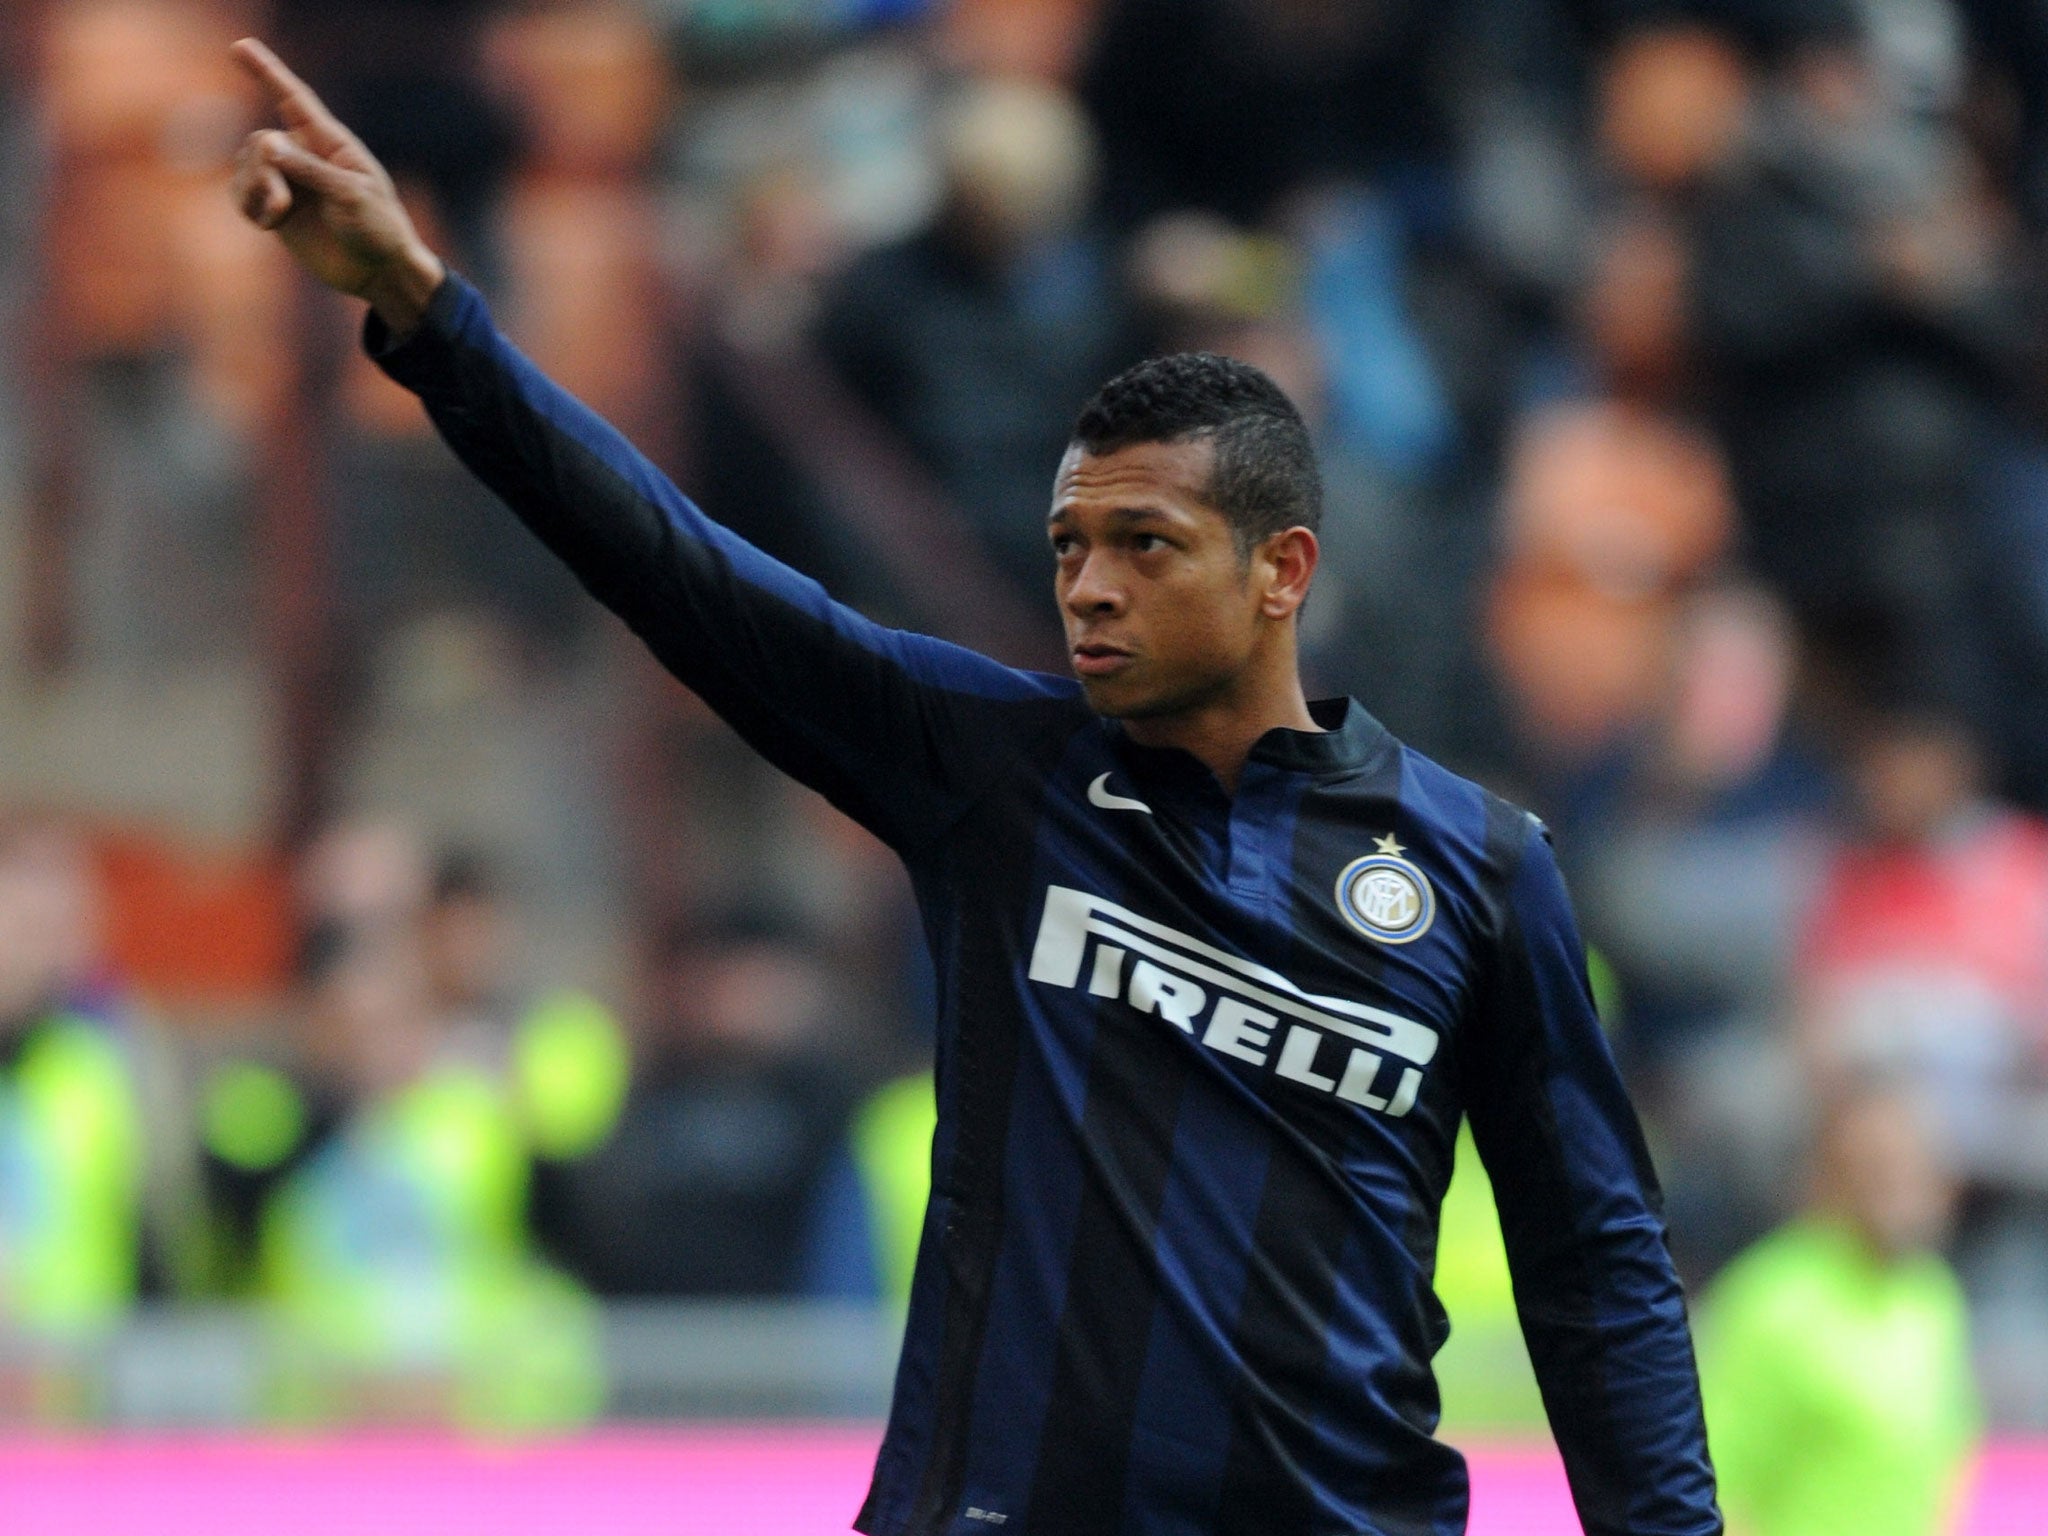 Fredy Guarin celebrates after scoring a goal during the Serie A match between Internazionale and Sampdoria at San Siro Stadium on 1 December